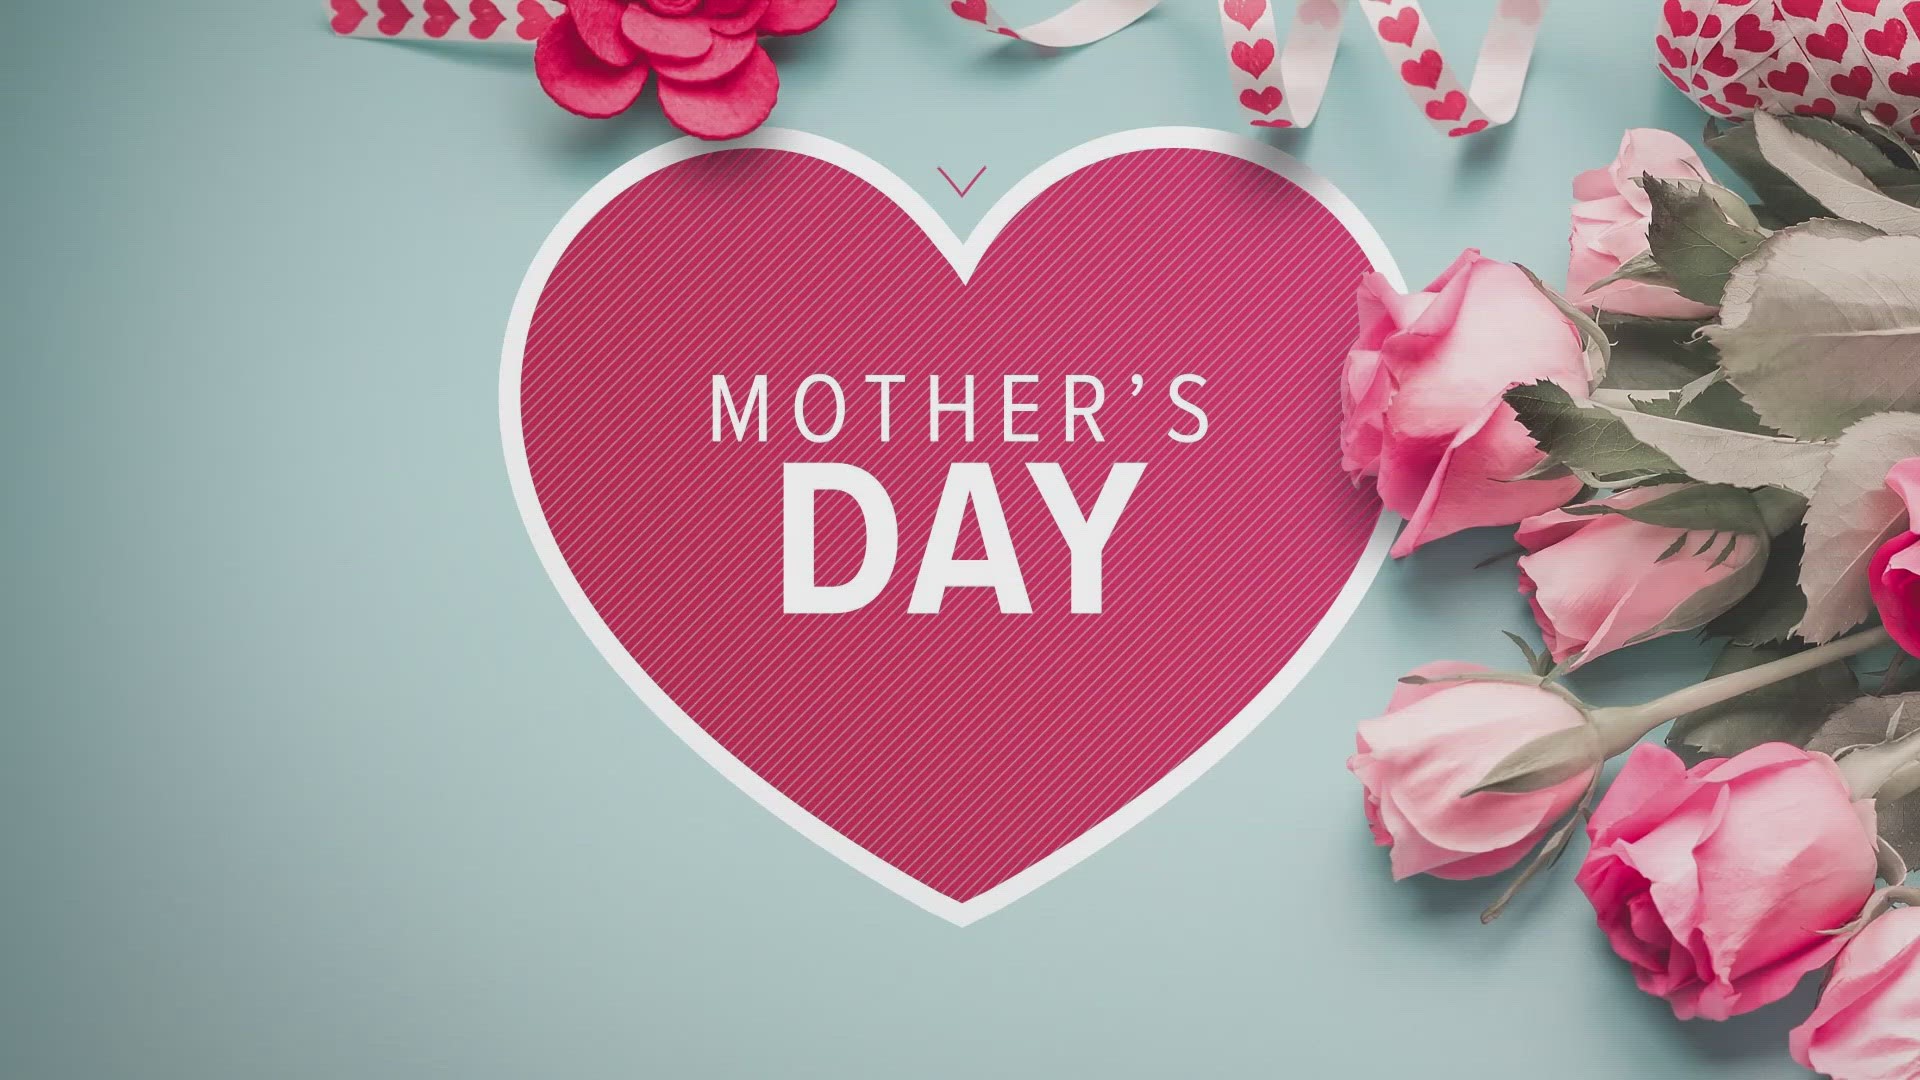 To all of the WBIR team's mothers — Happy Mother's Day!